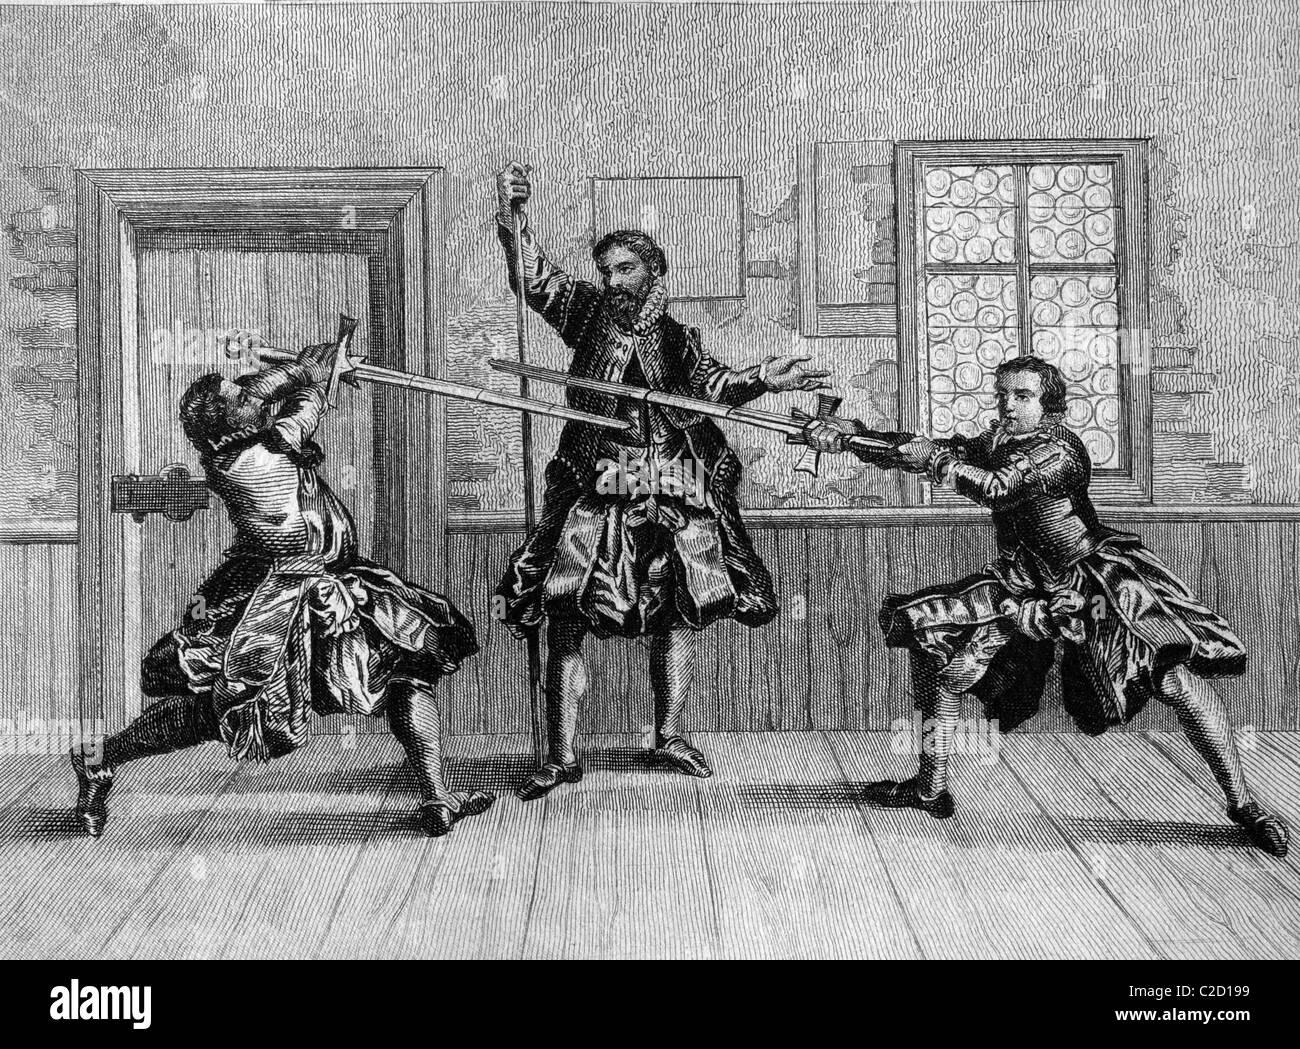 Fencing practice, 1570, historical illustration Stock Photo